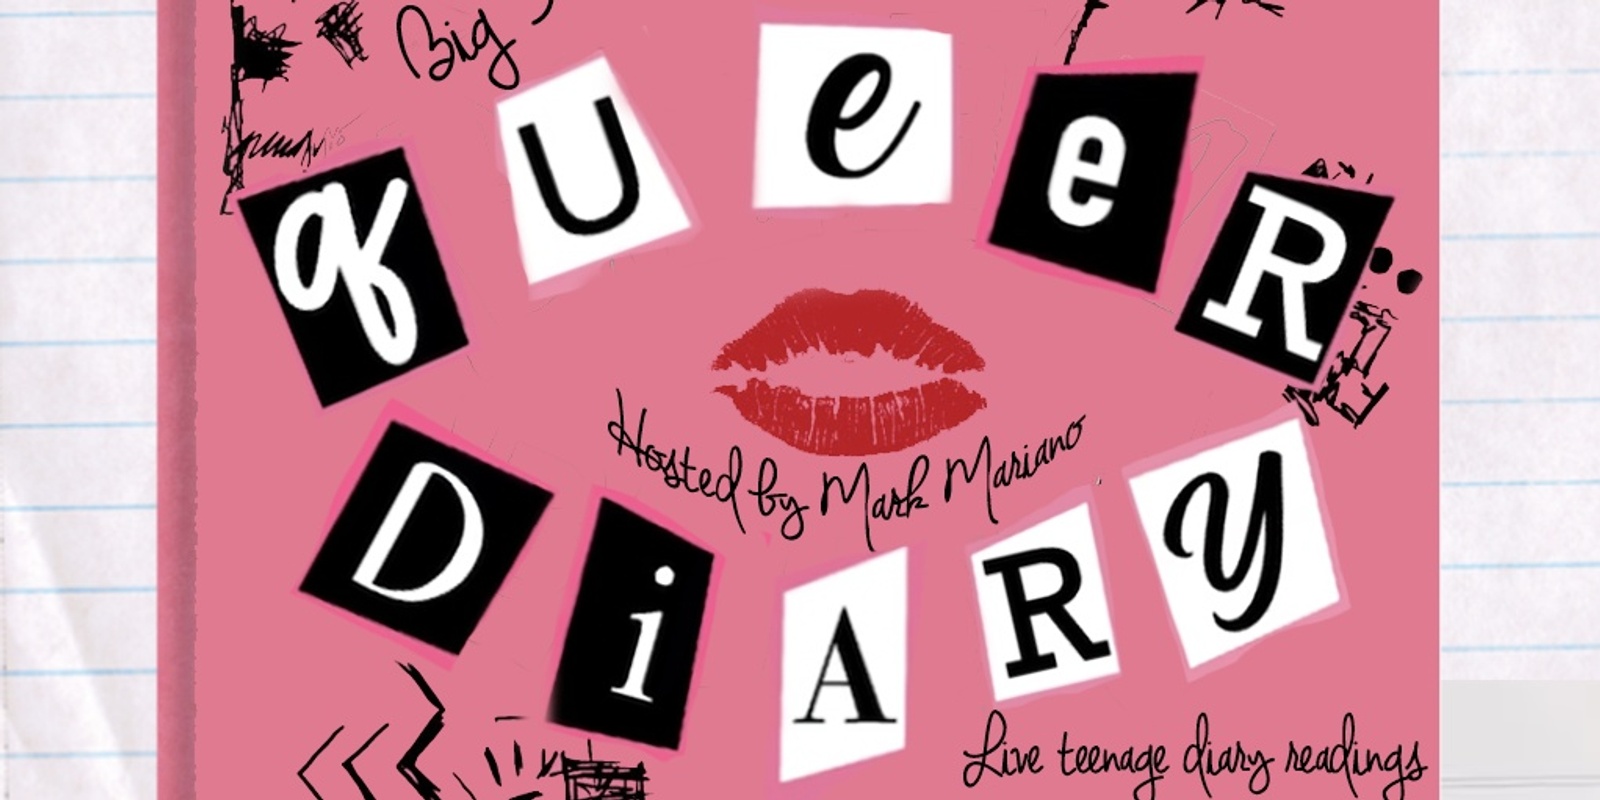 Queer Diary: Hosted by Mark Mariano, Presented by BIG THICK ENERGY